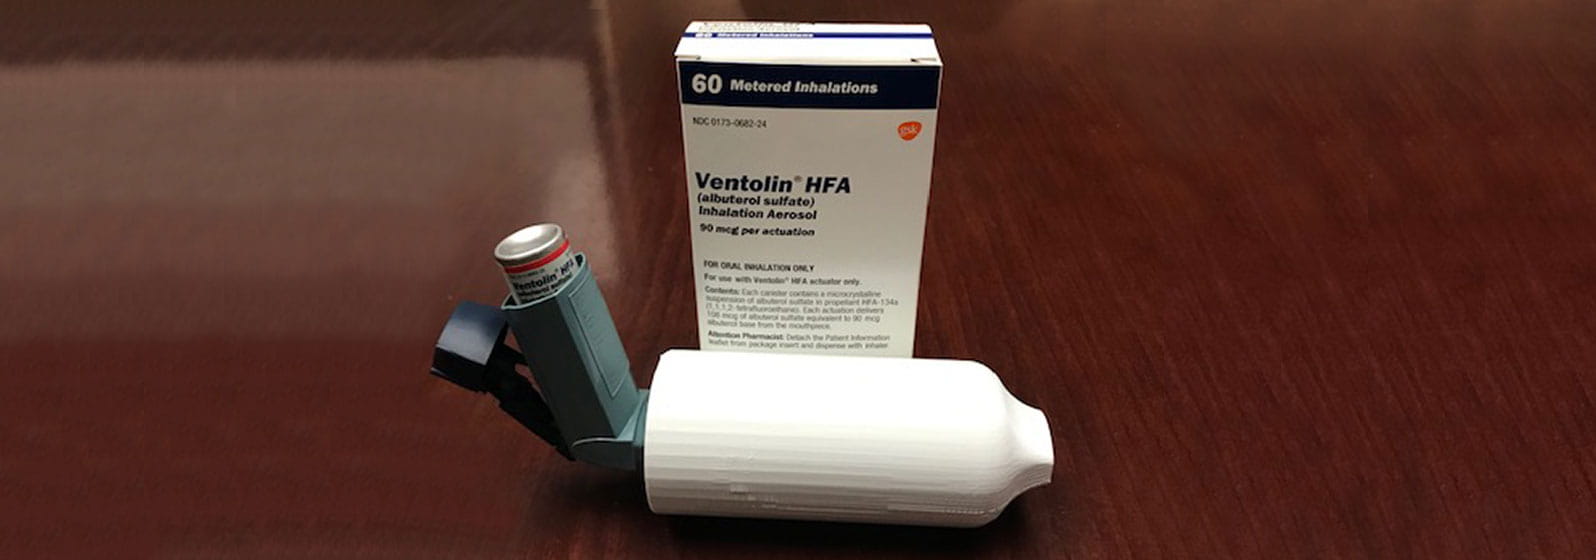 EnMed Collaboration Addresses Shortage of Inhaler Device to Help COVID